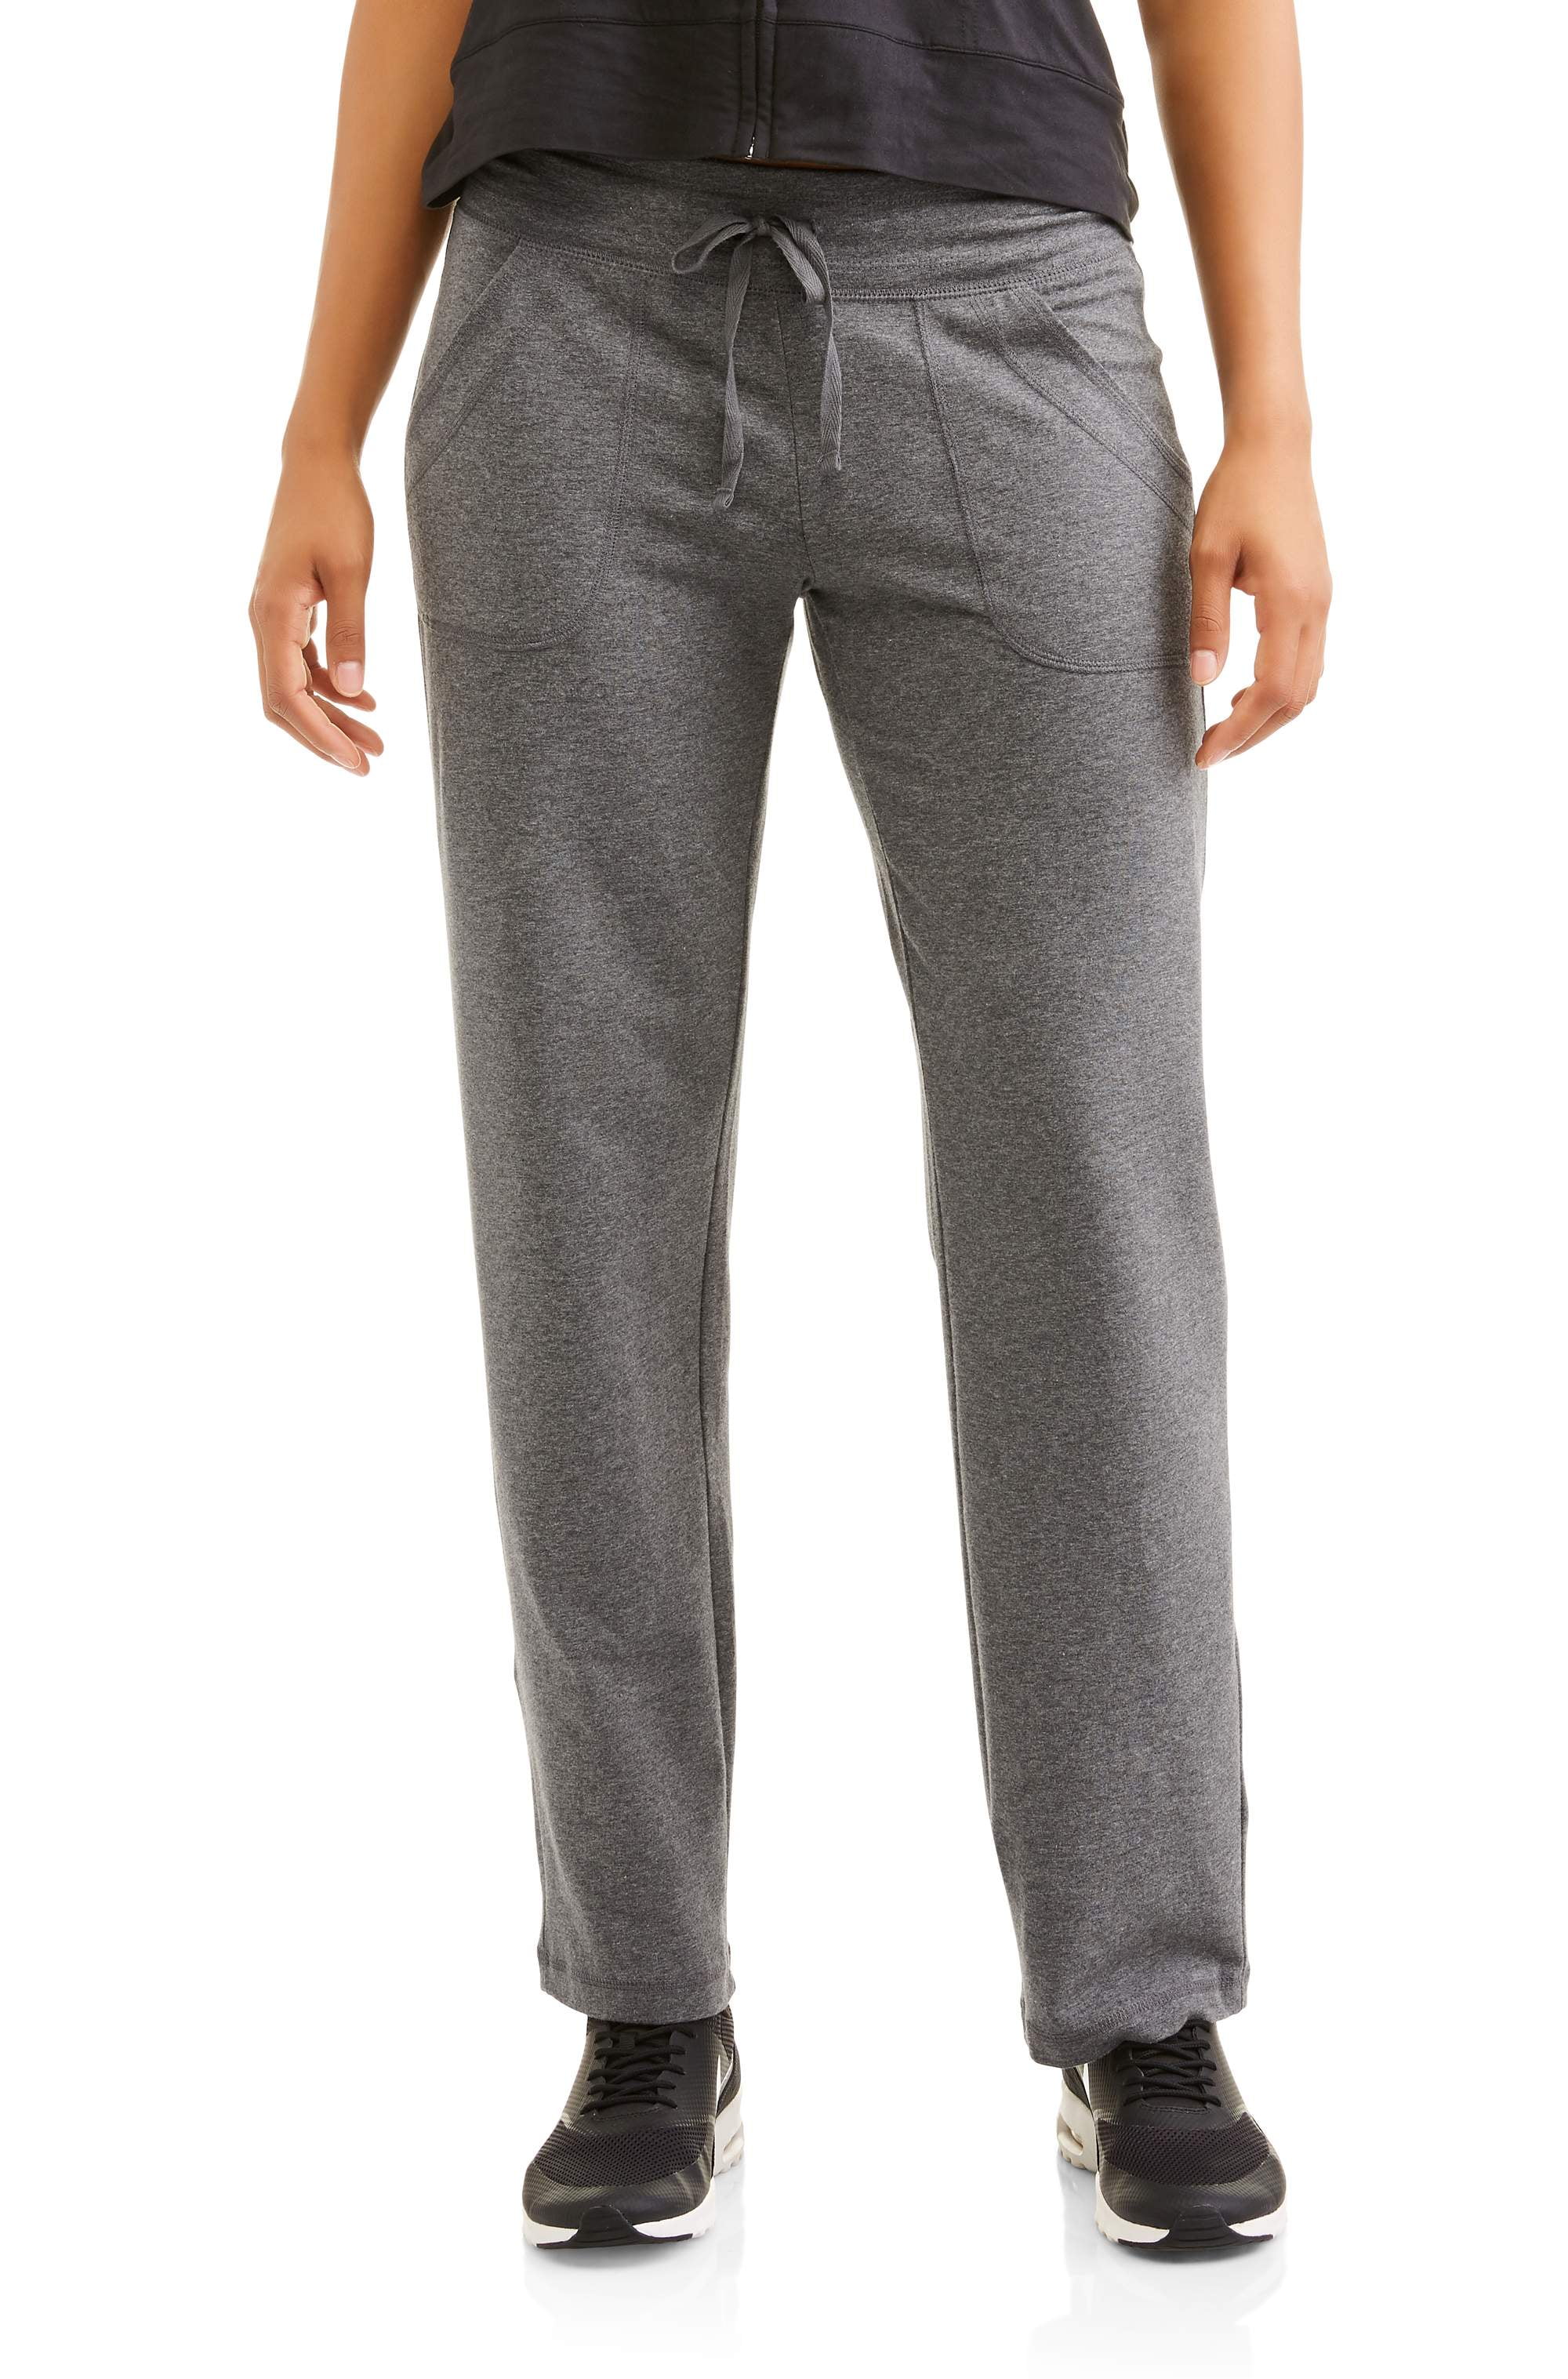 Athletic Works Gray Active Pants Size L (Petite) - 26% off